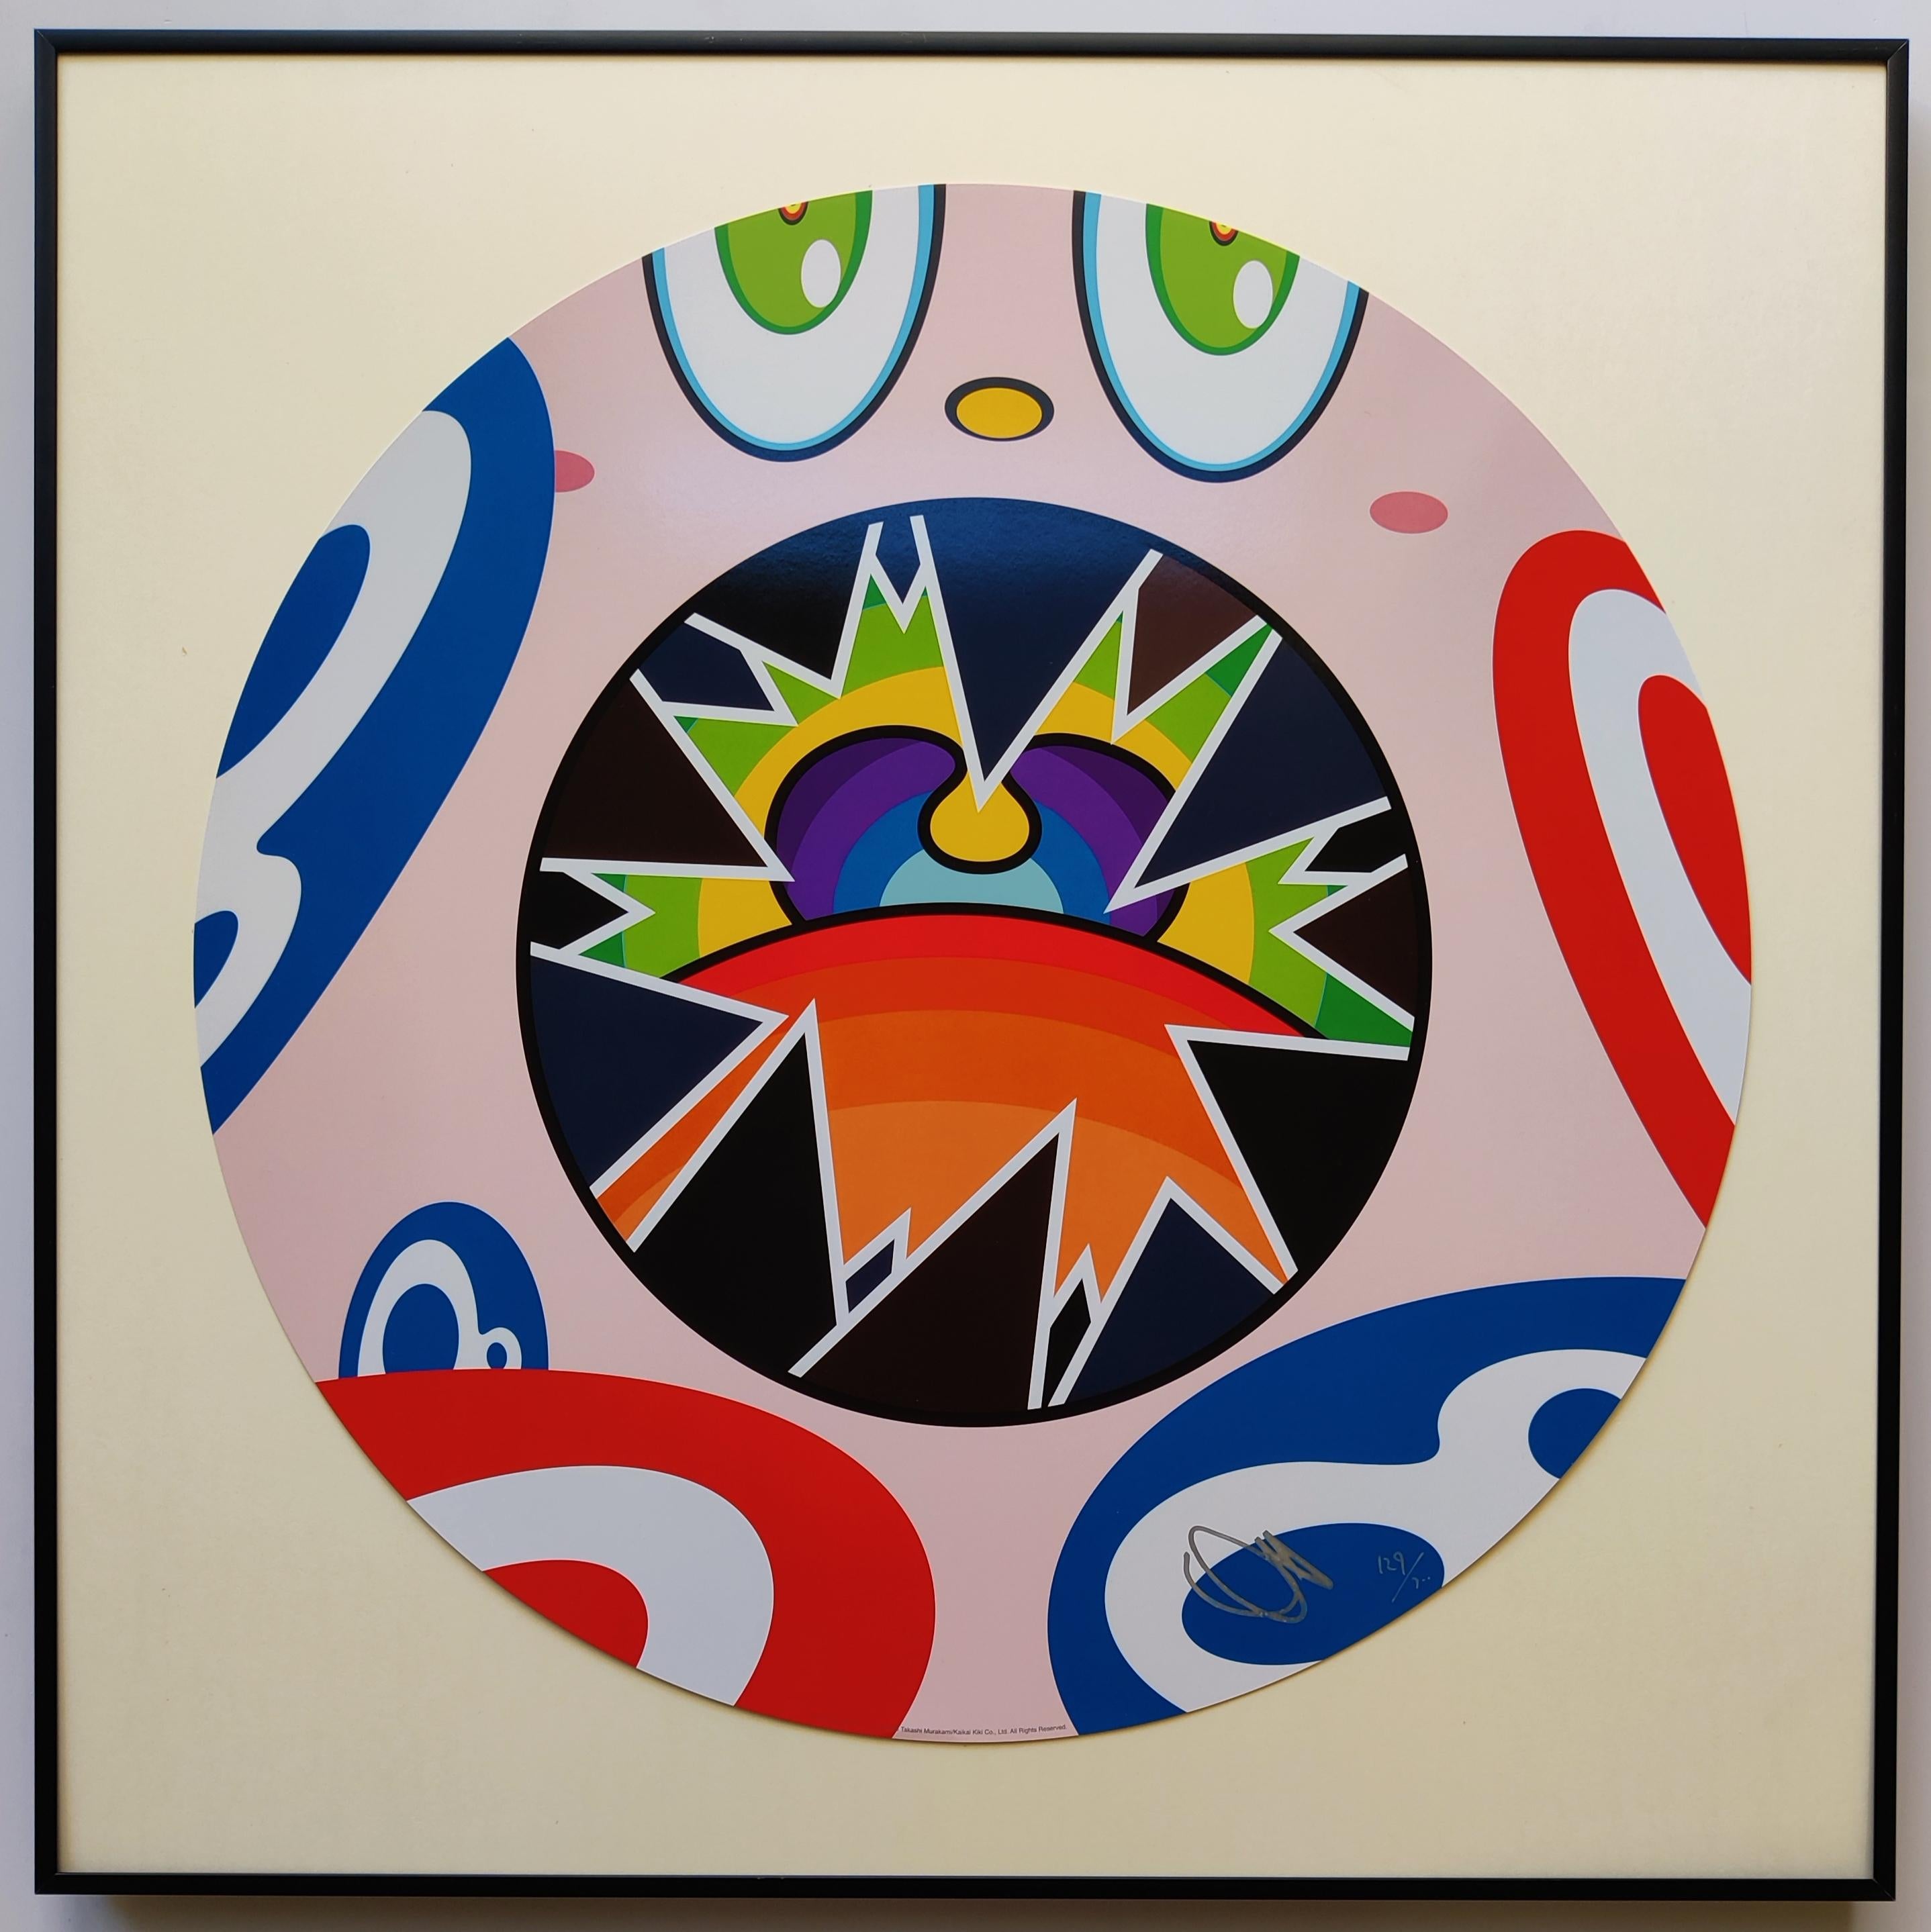 Takashi Murakami
We are the Square Jocular Clan (8), 2018
Offset lithograph
Edition: 129/300
Diameter: 50 cm
Hand Signed & Numbered by Takashi Murakami
The artwork is in excellent condition, including the original pack
